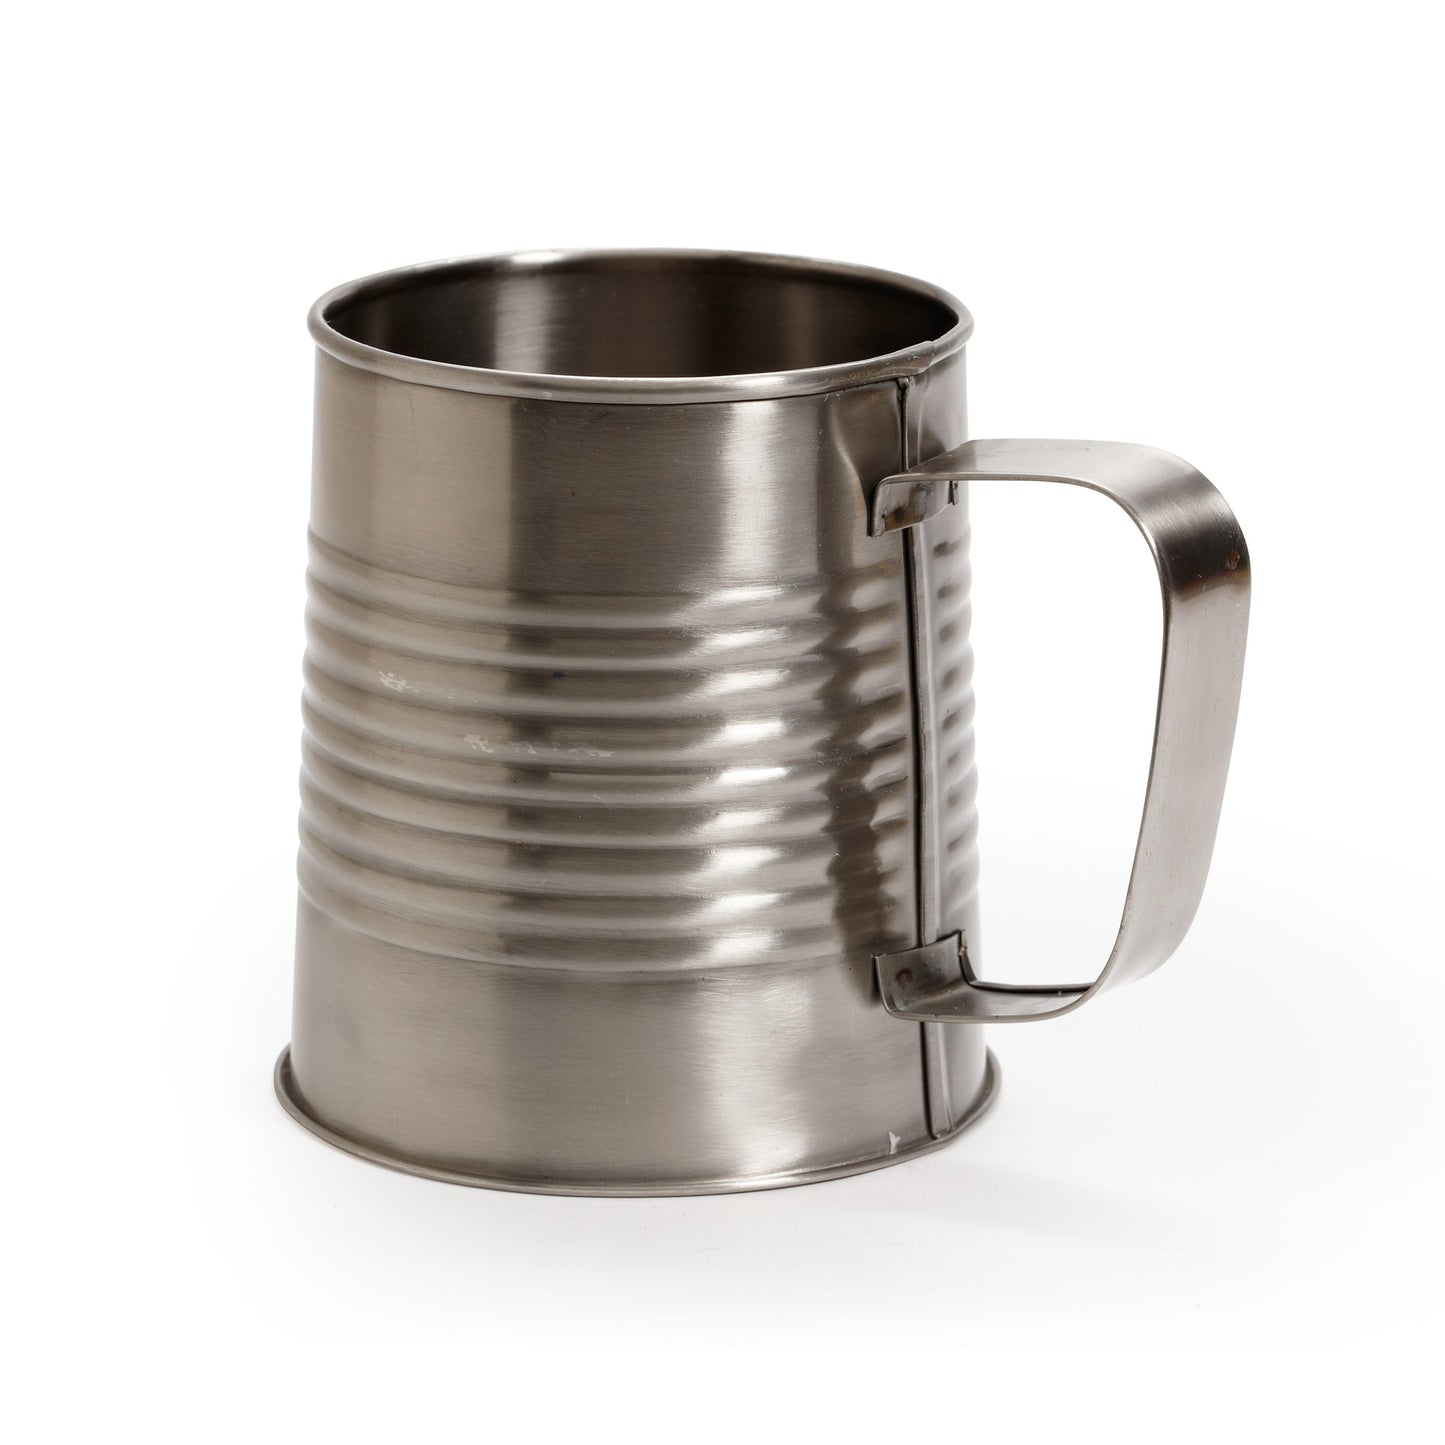 28 oz. Stainless Steel Mug with Handle, (30 oz. rim-full), 3.75" Top Dia., 4.75" Tall, G.E.T. Copper Drinkware